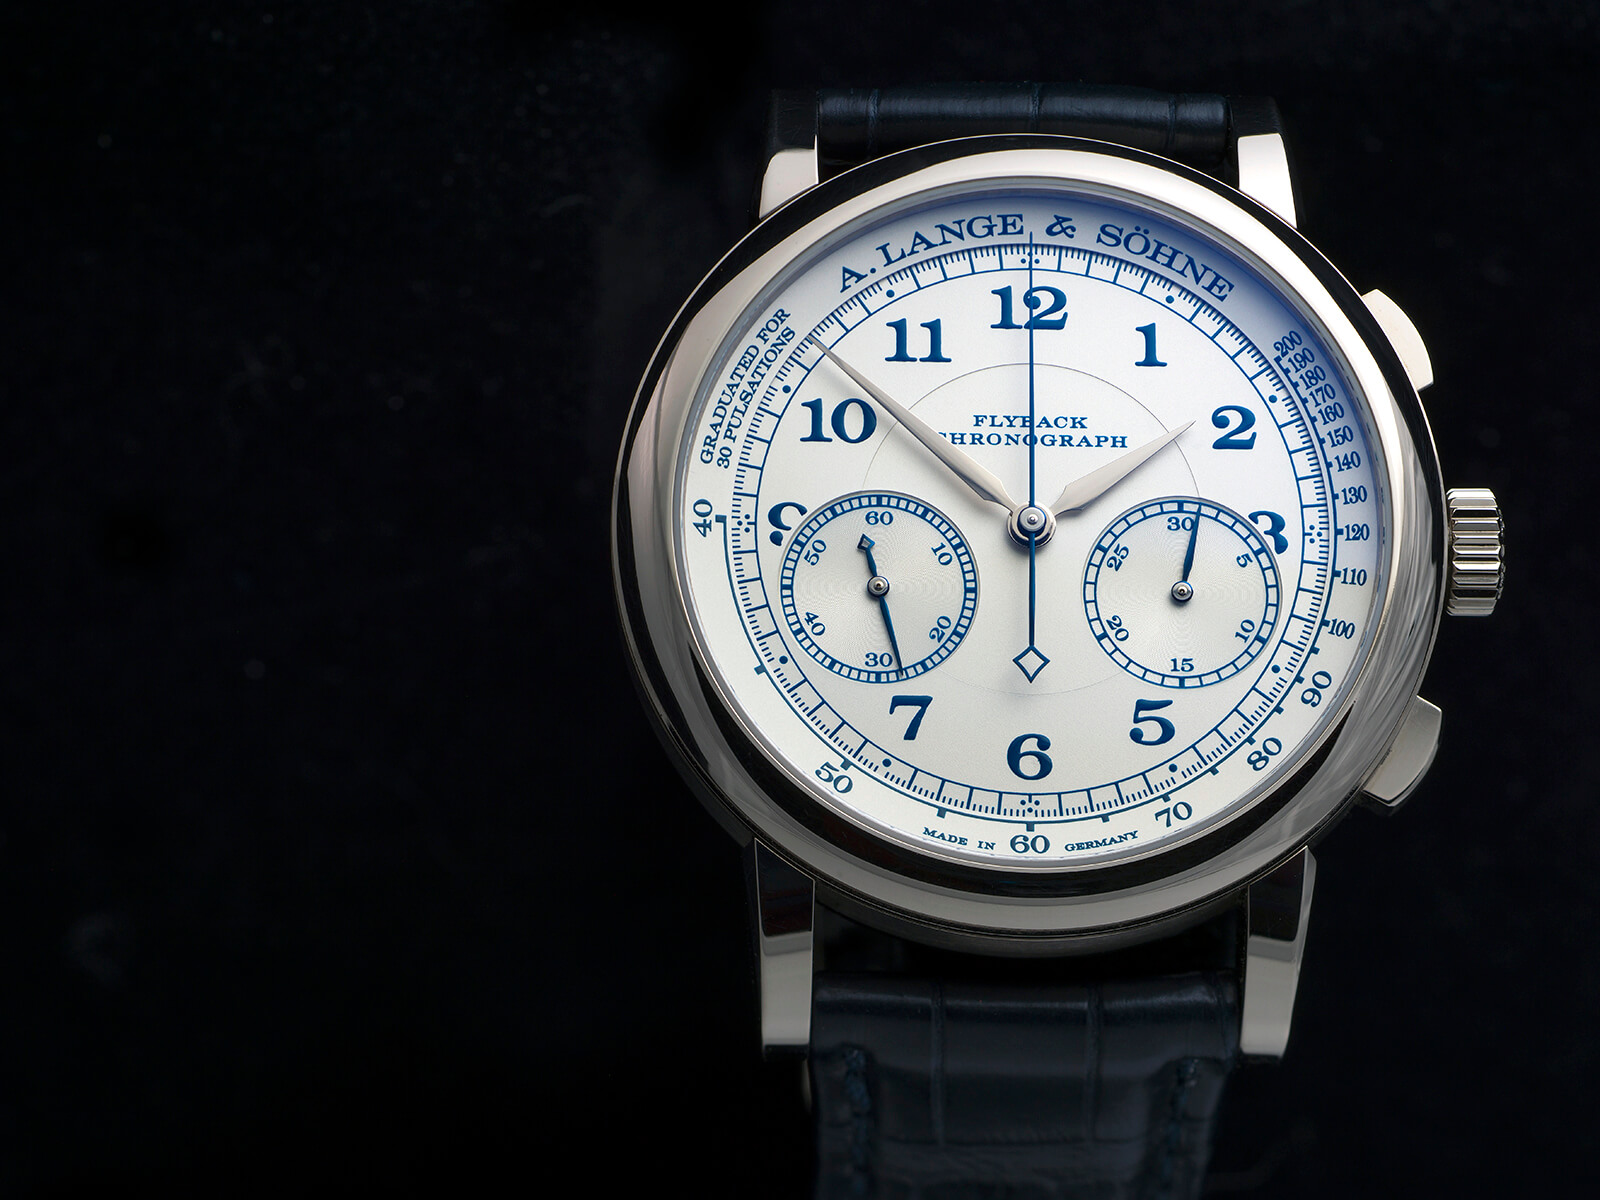 Ready for business: A. Lange & Söhne1815 Chronograph Boutique Edition on leather strap